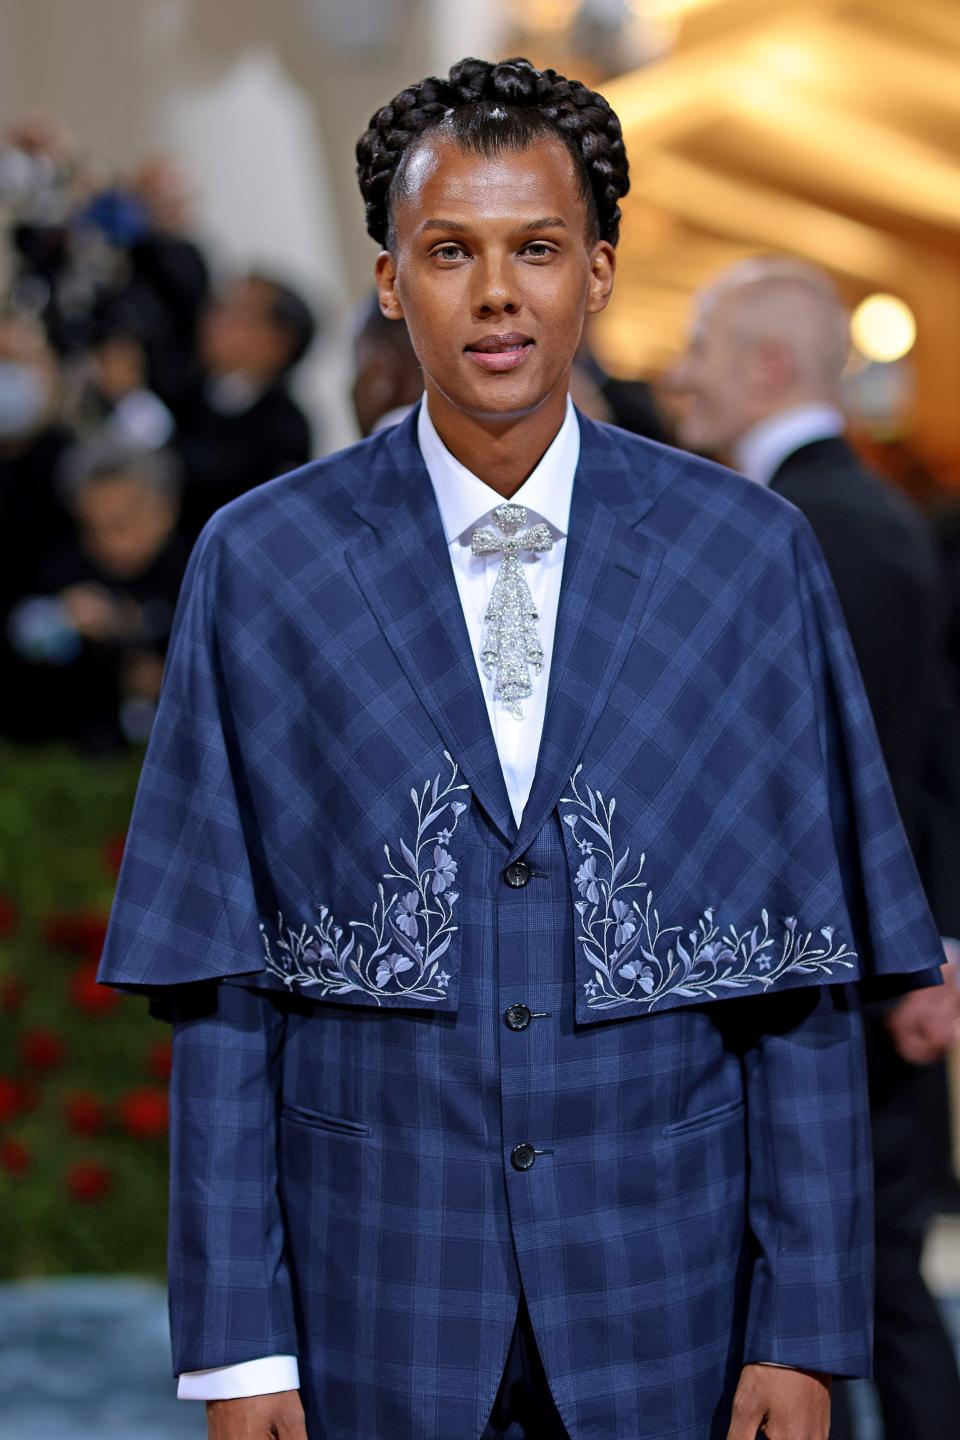 Stromae in a blue checkered plaid suit with an attached cropped cape with additional embroidery. He has a crystal tie on his white button-down. His hair is in a braided updo.